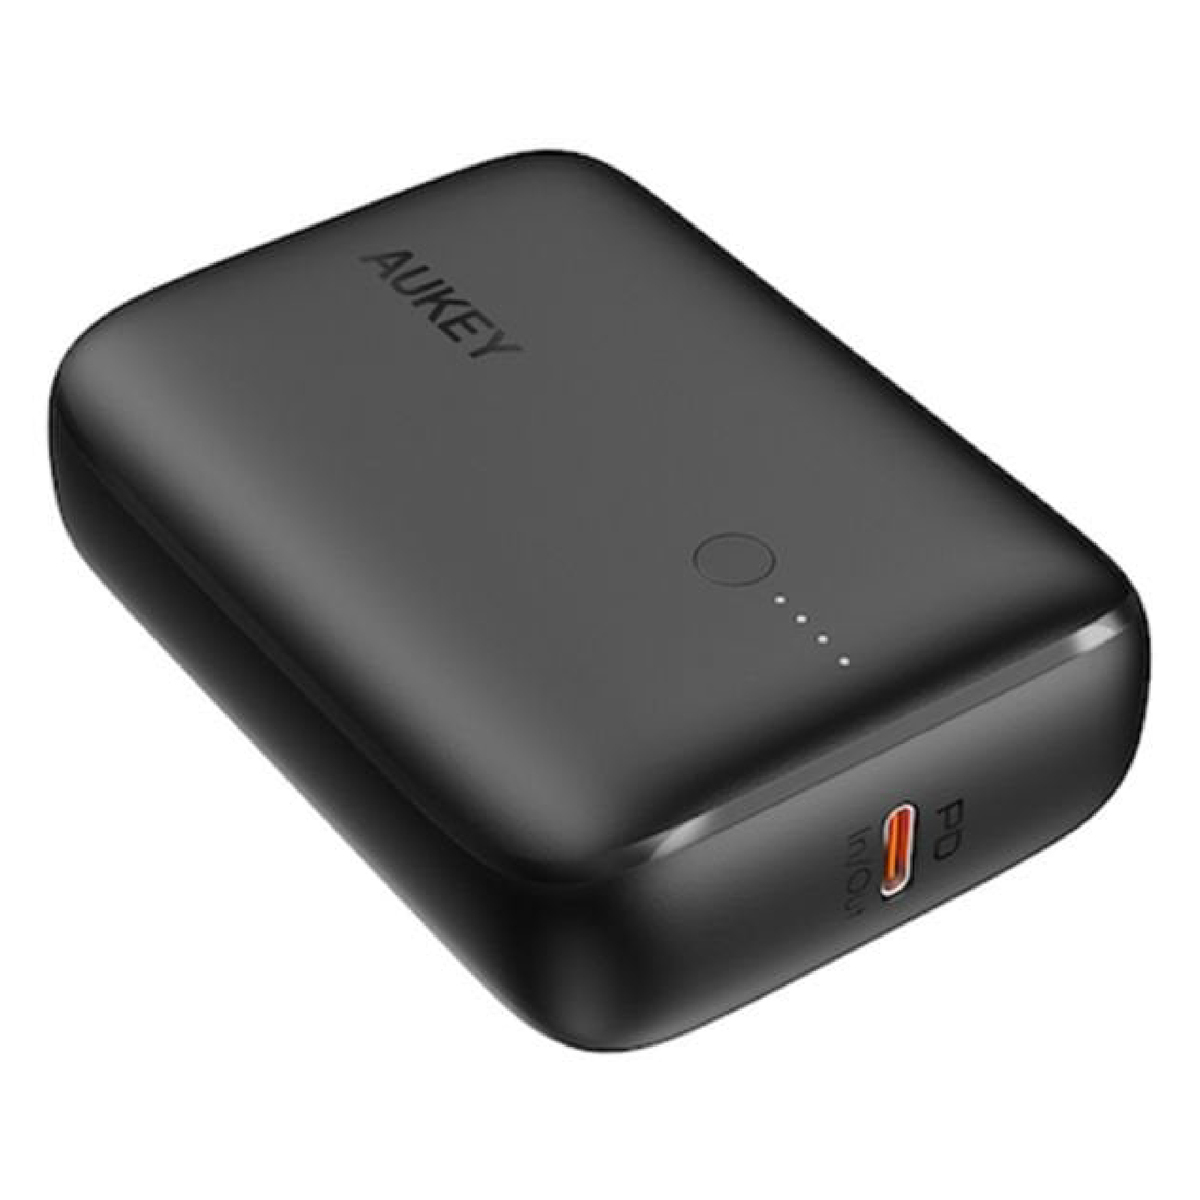 Aukey Power Bank Portable Charger, 10000mAh Battery Capacity, 20W Power Delivery, Intelligent Safety Protection, Quick Charge 3.0, Ultra Compact, Broad Compatibility, Black-PB-N83S